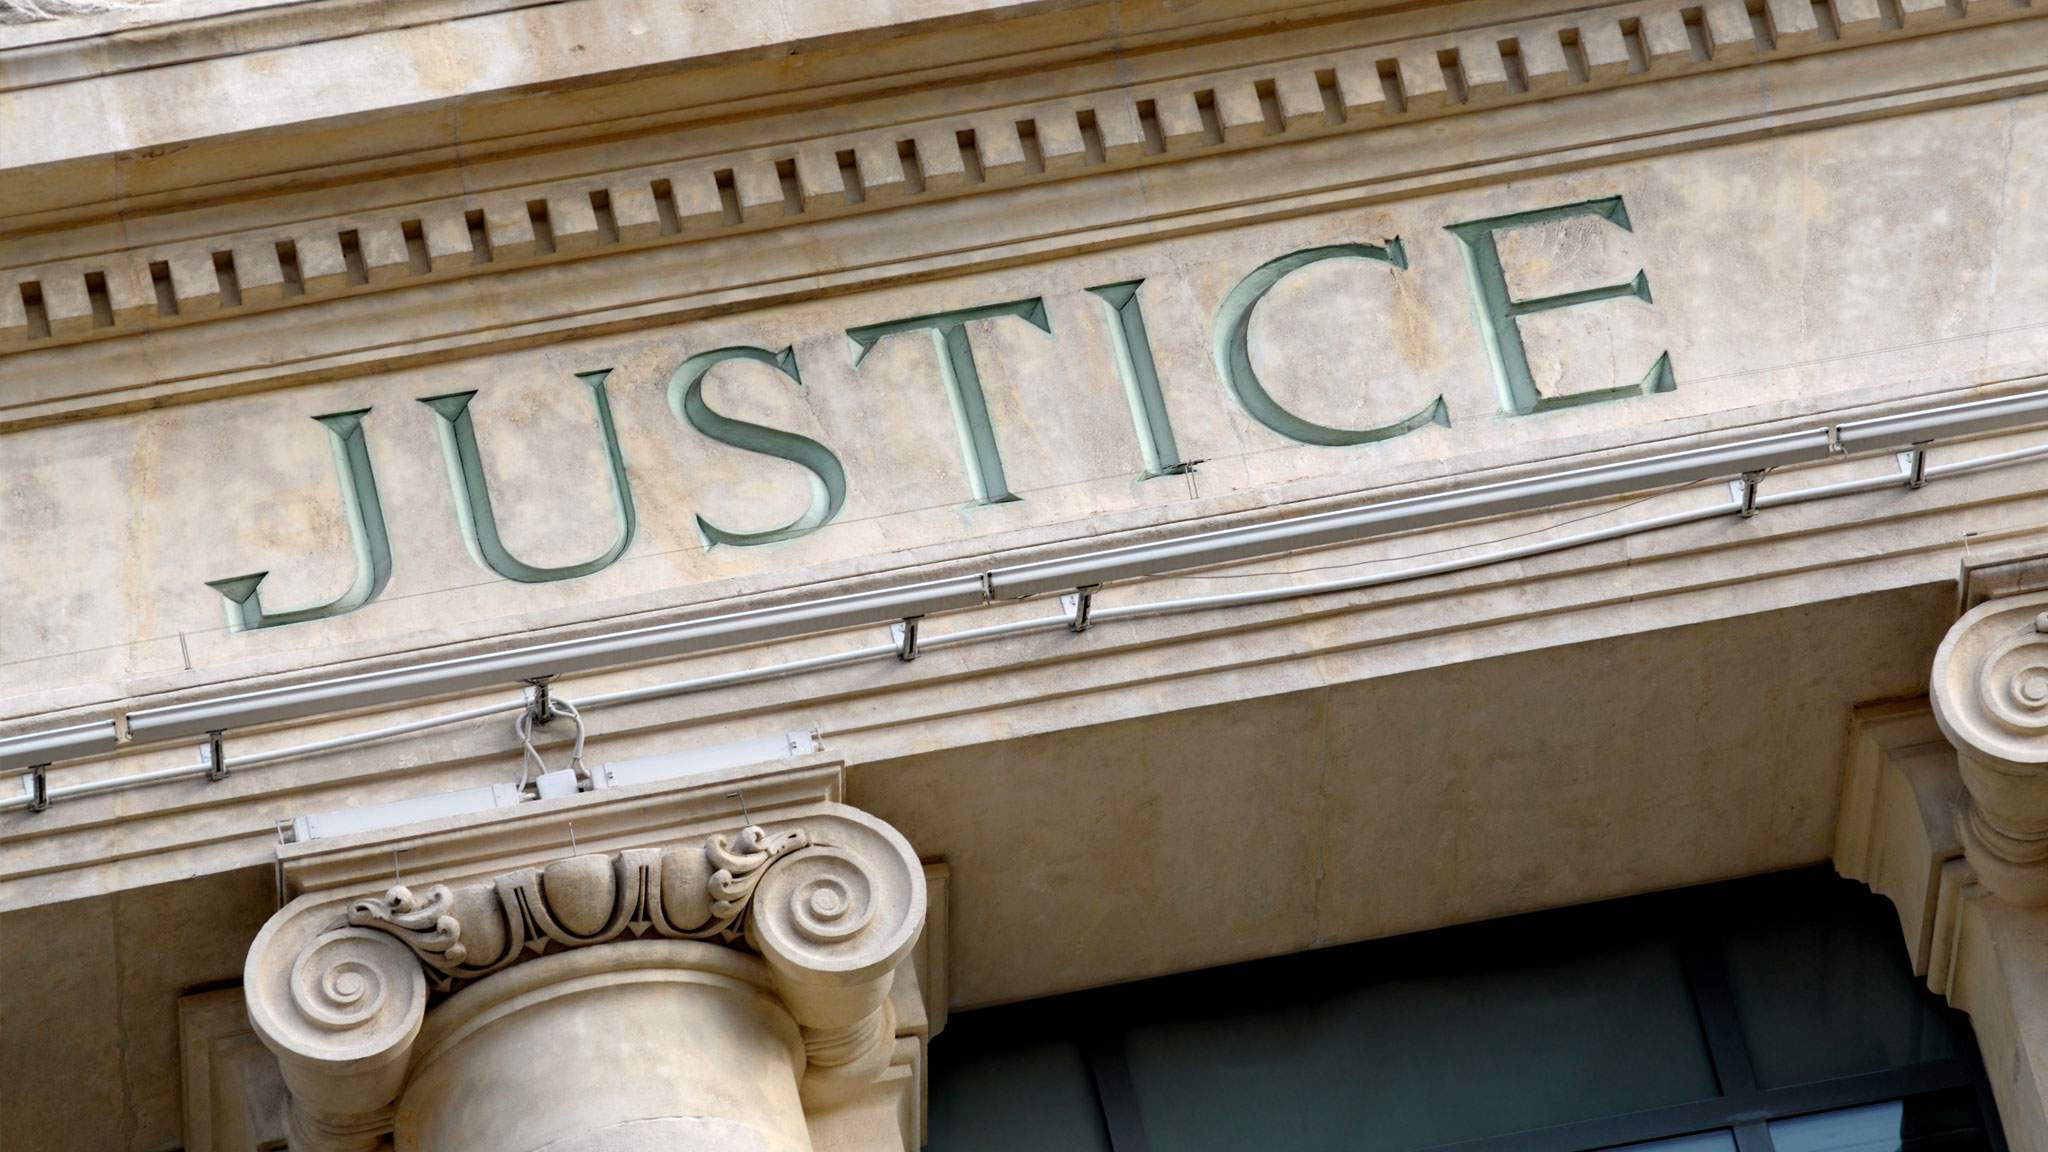 "Justice" carved above a doorway.